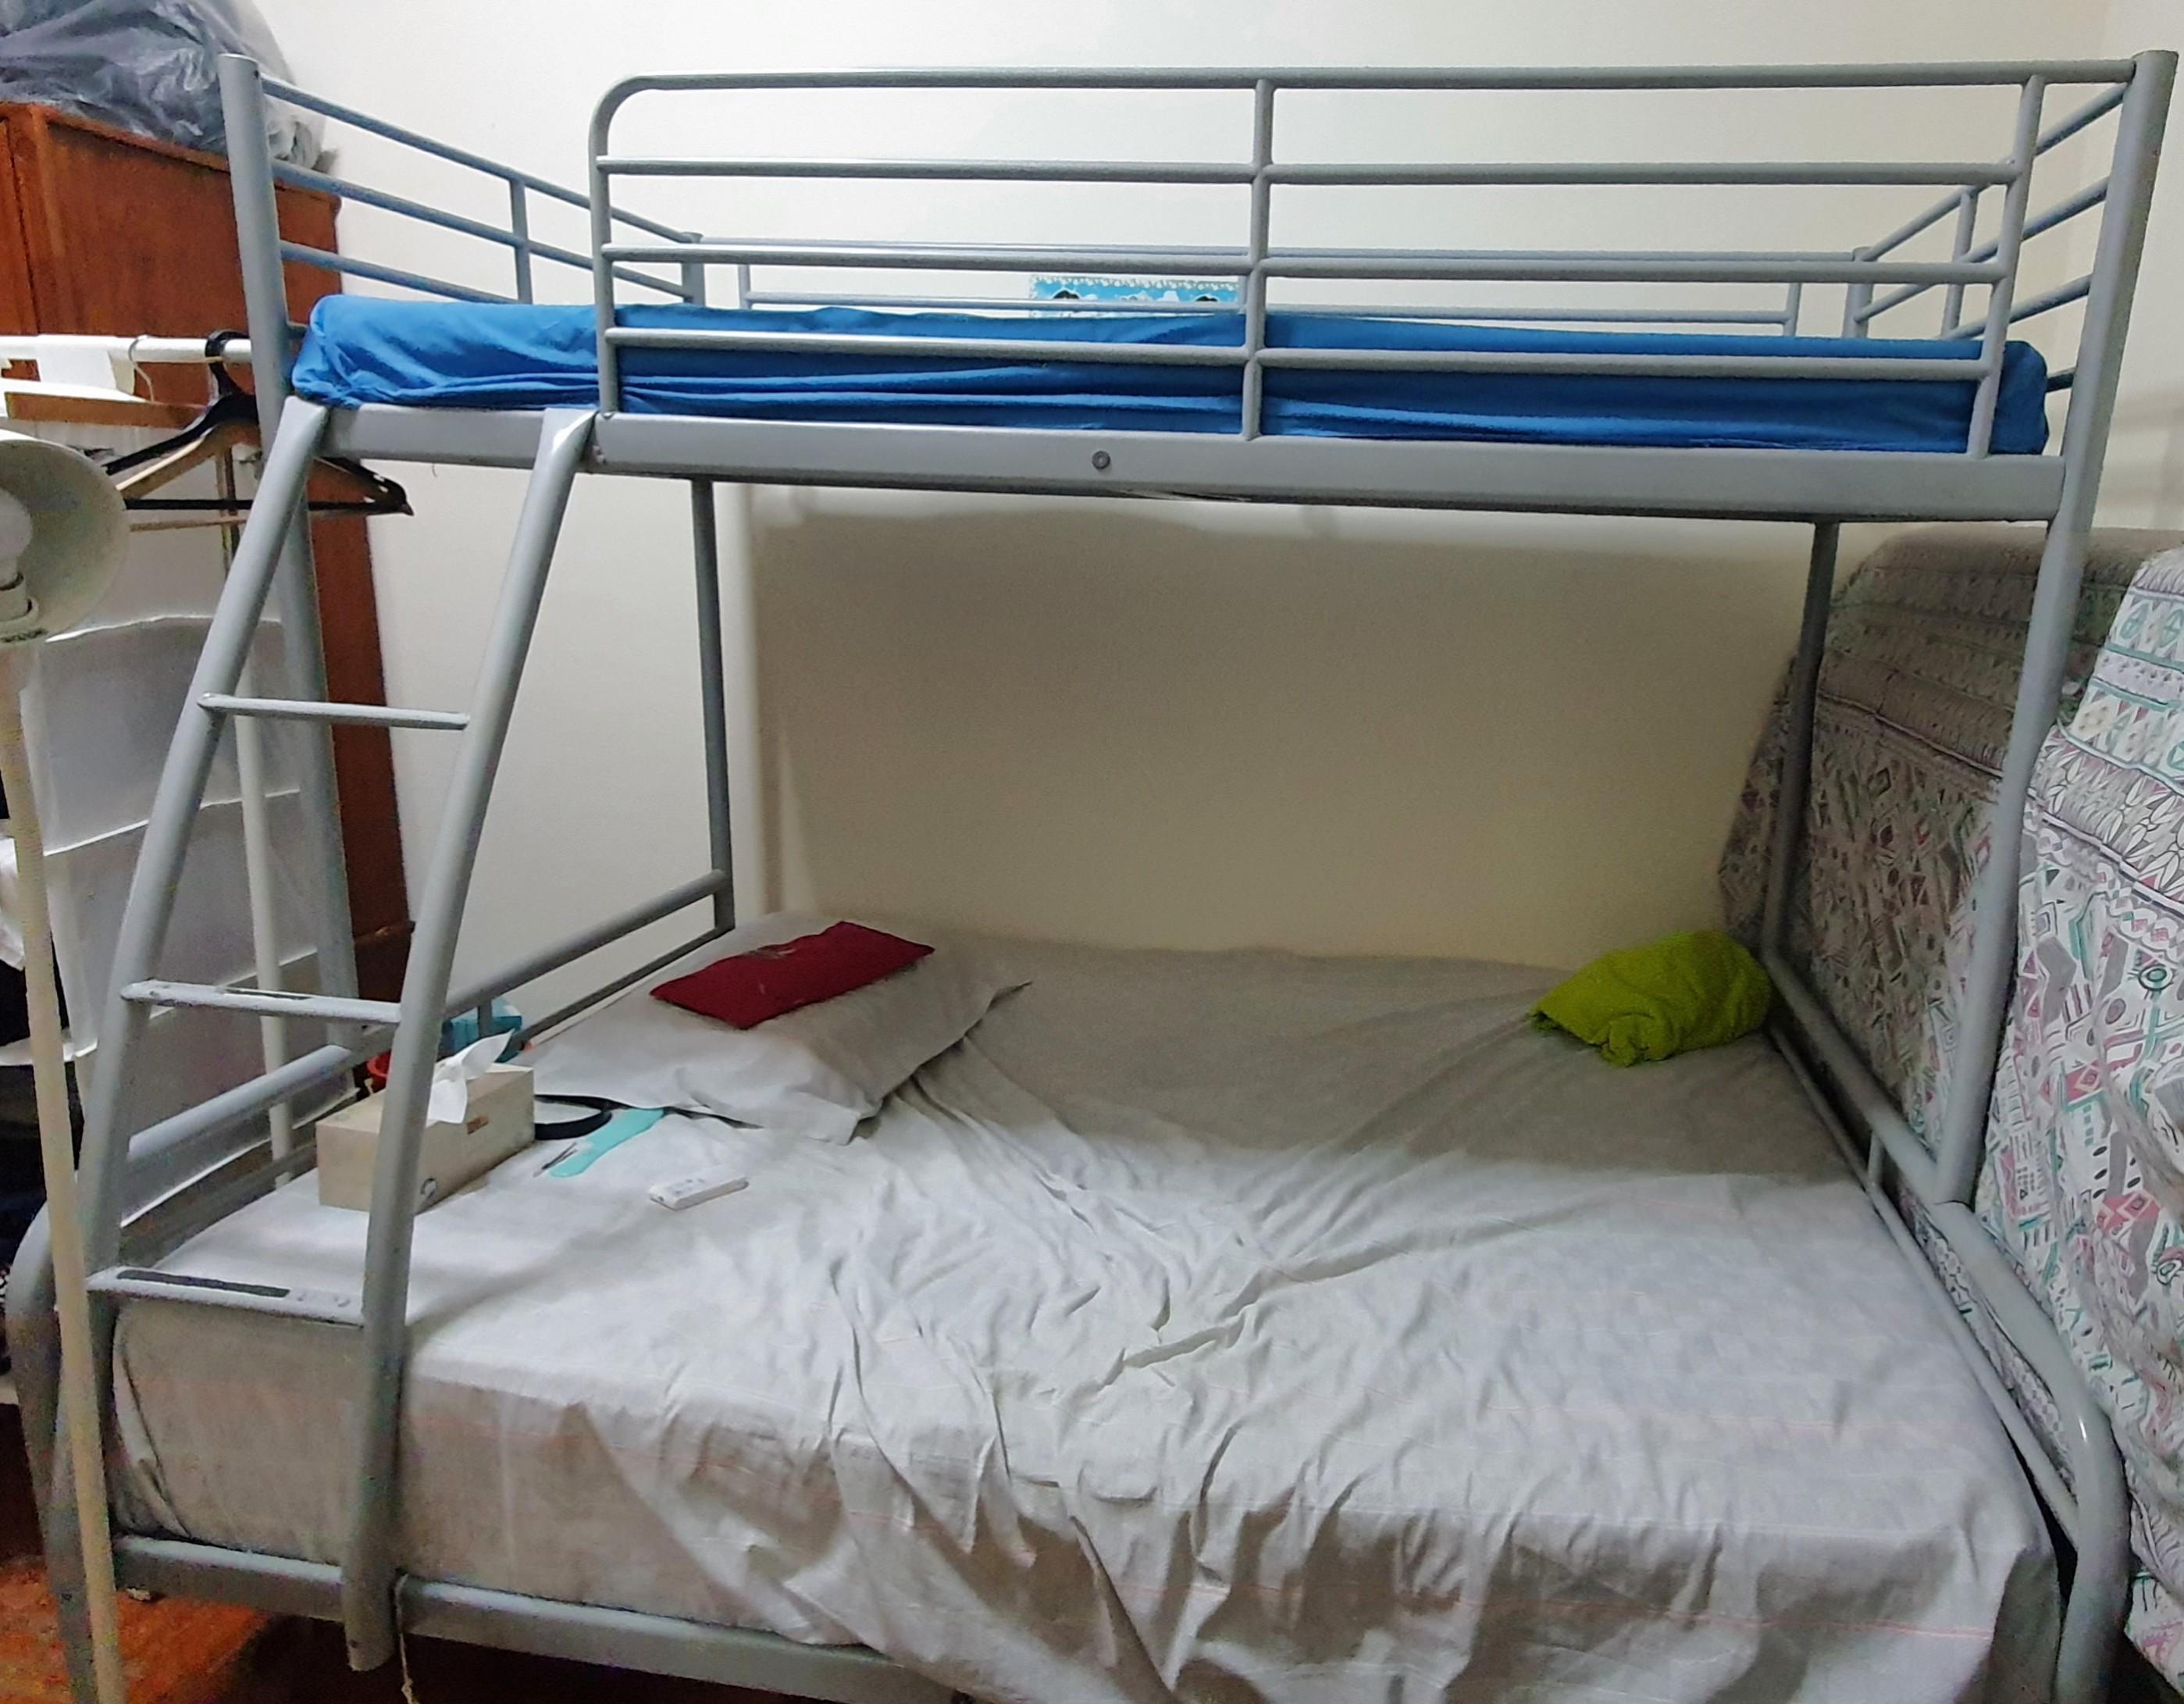 Ikea Tromso Double Decker Bed Frame, Bunk Bed Double And Single Ikea